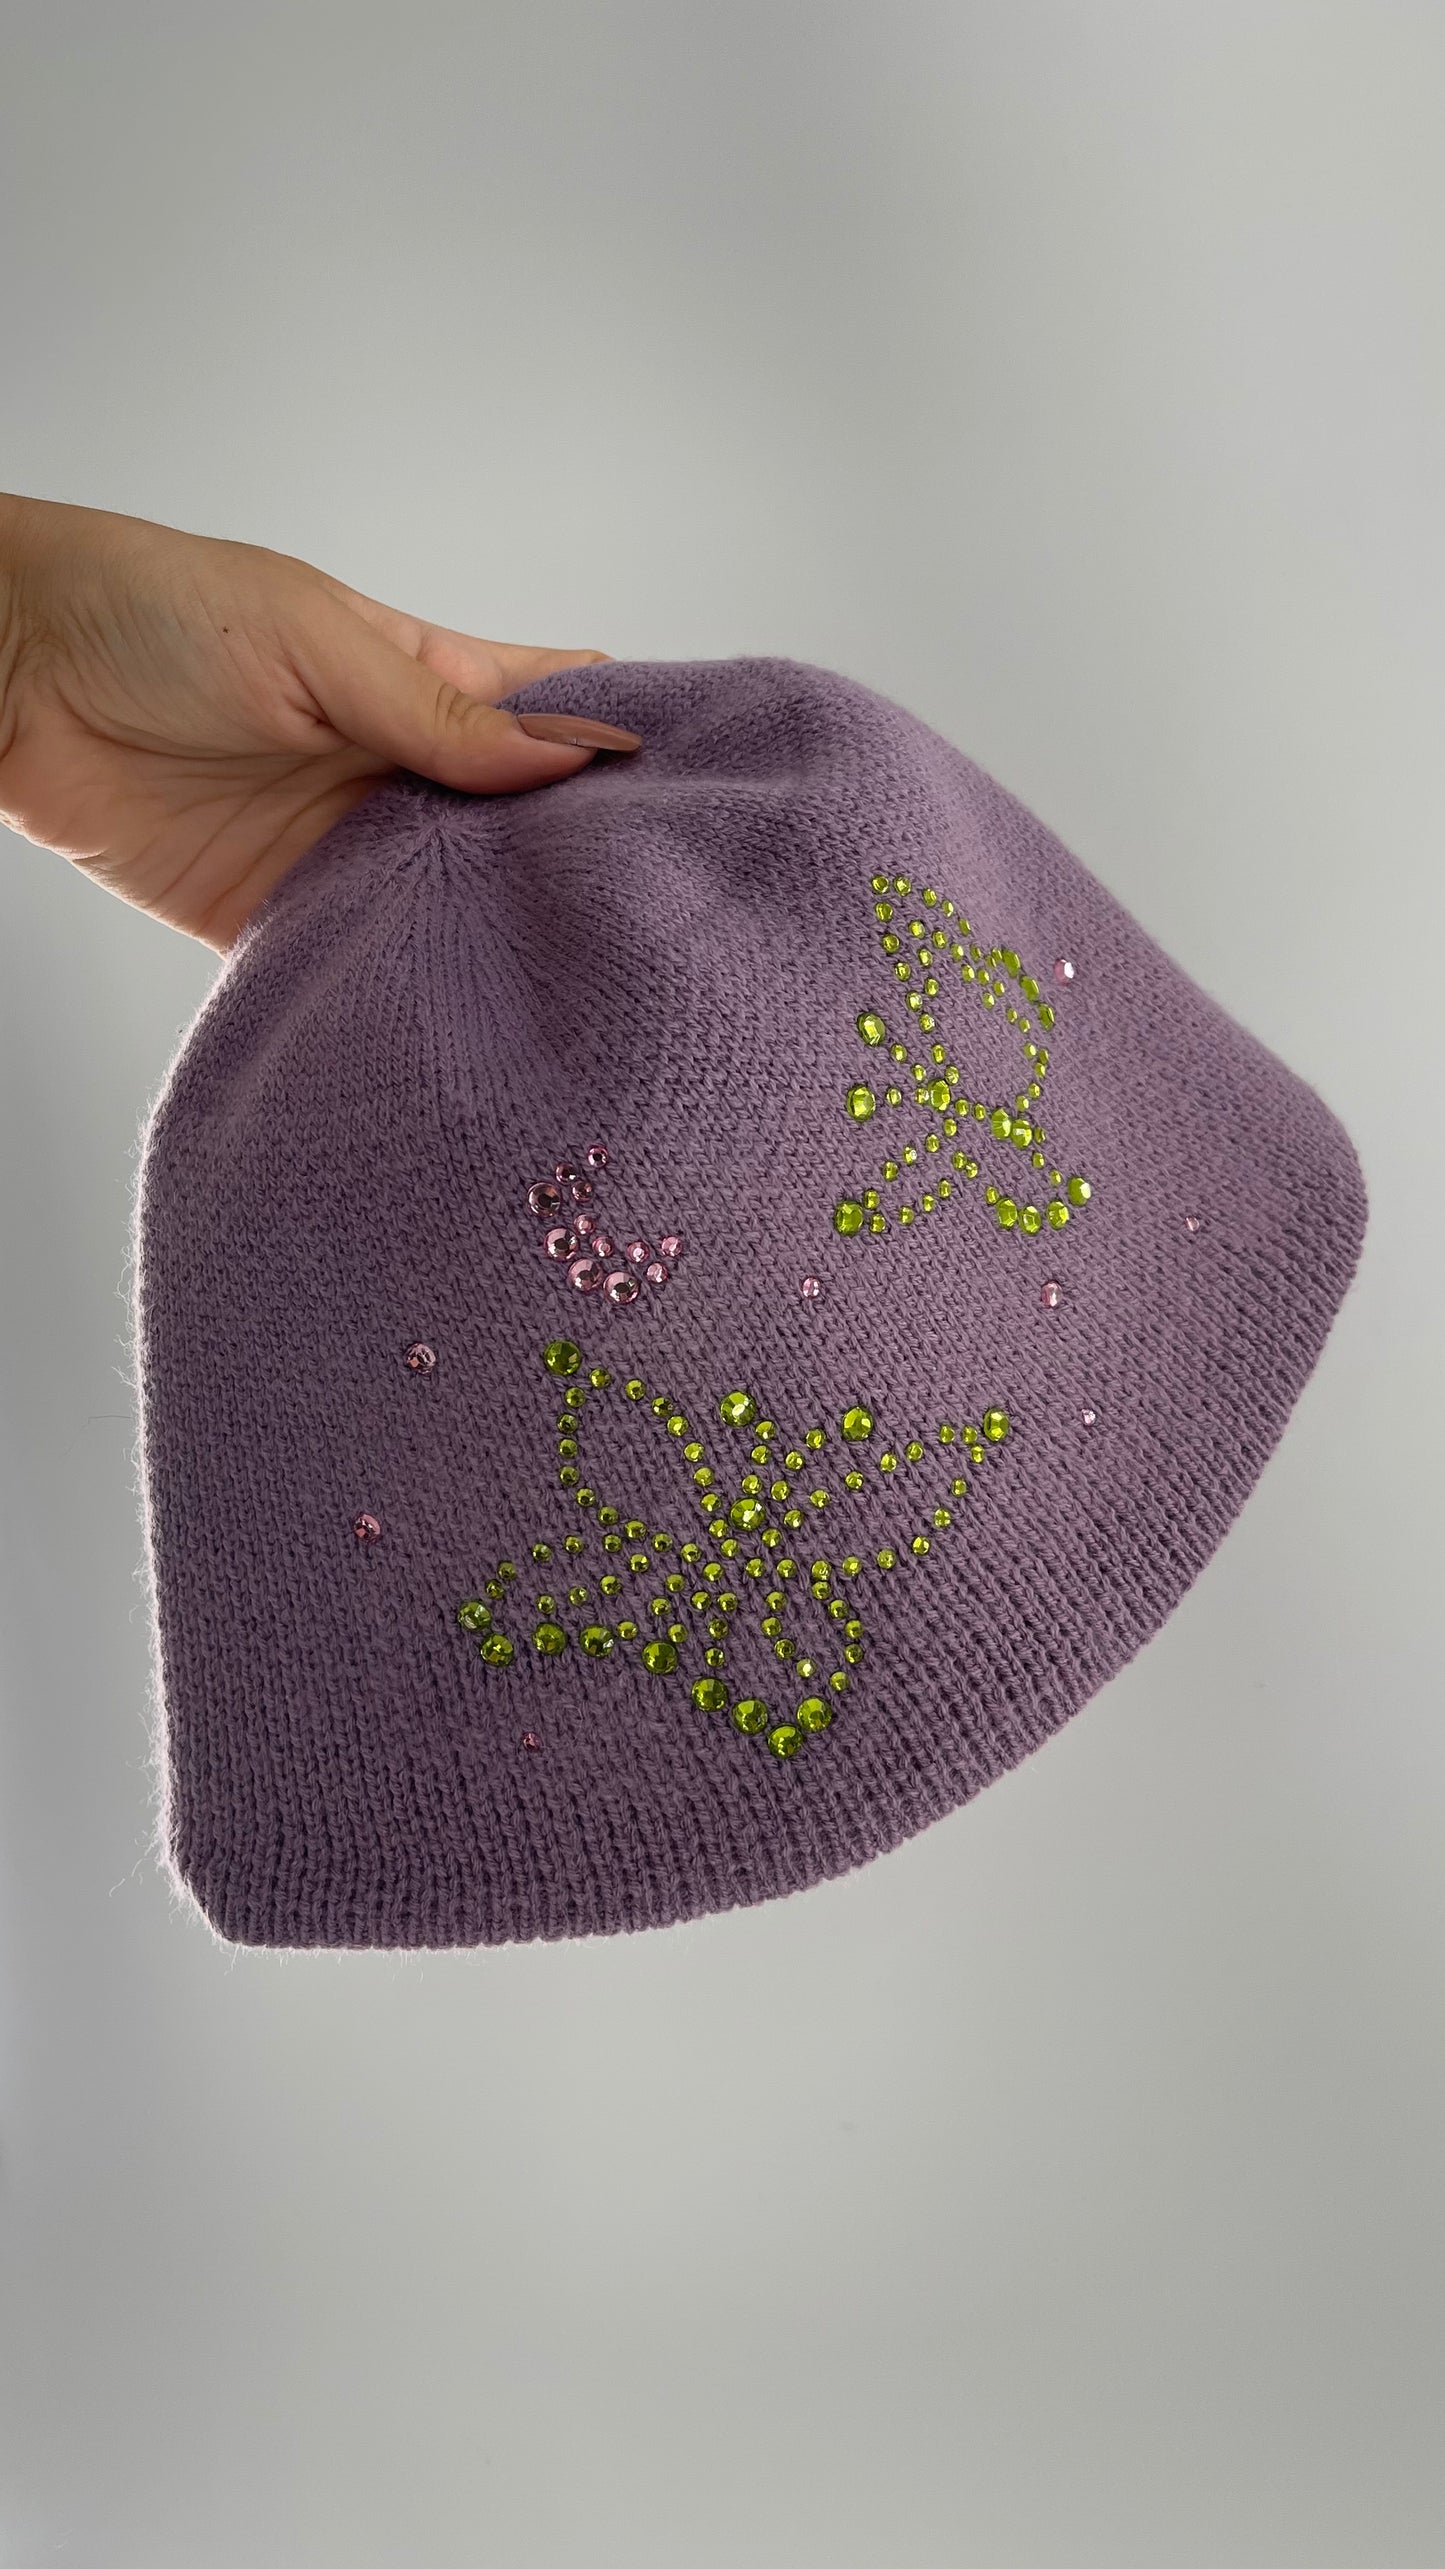 Urban Outfitters Lavender/Lilac Purple Knit Bucket Hat with Rhinestone Butterfly Details